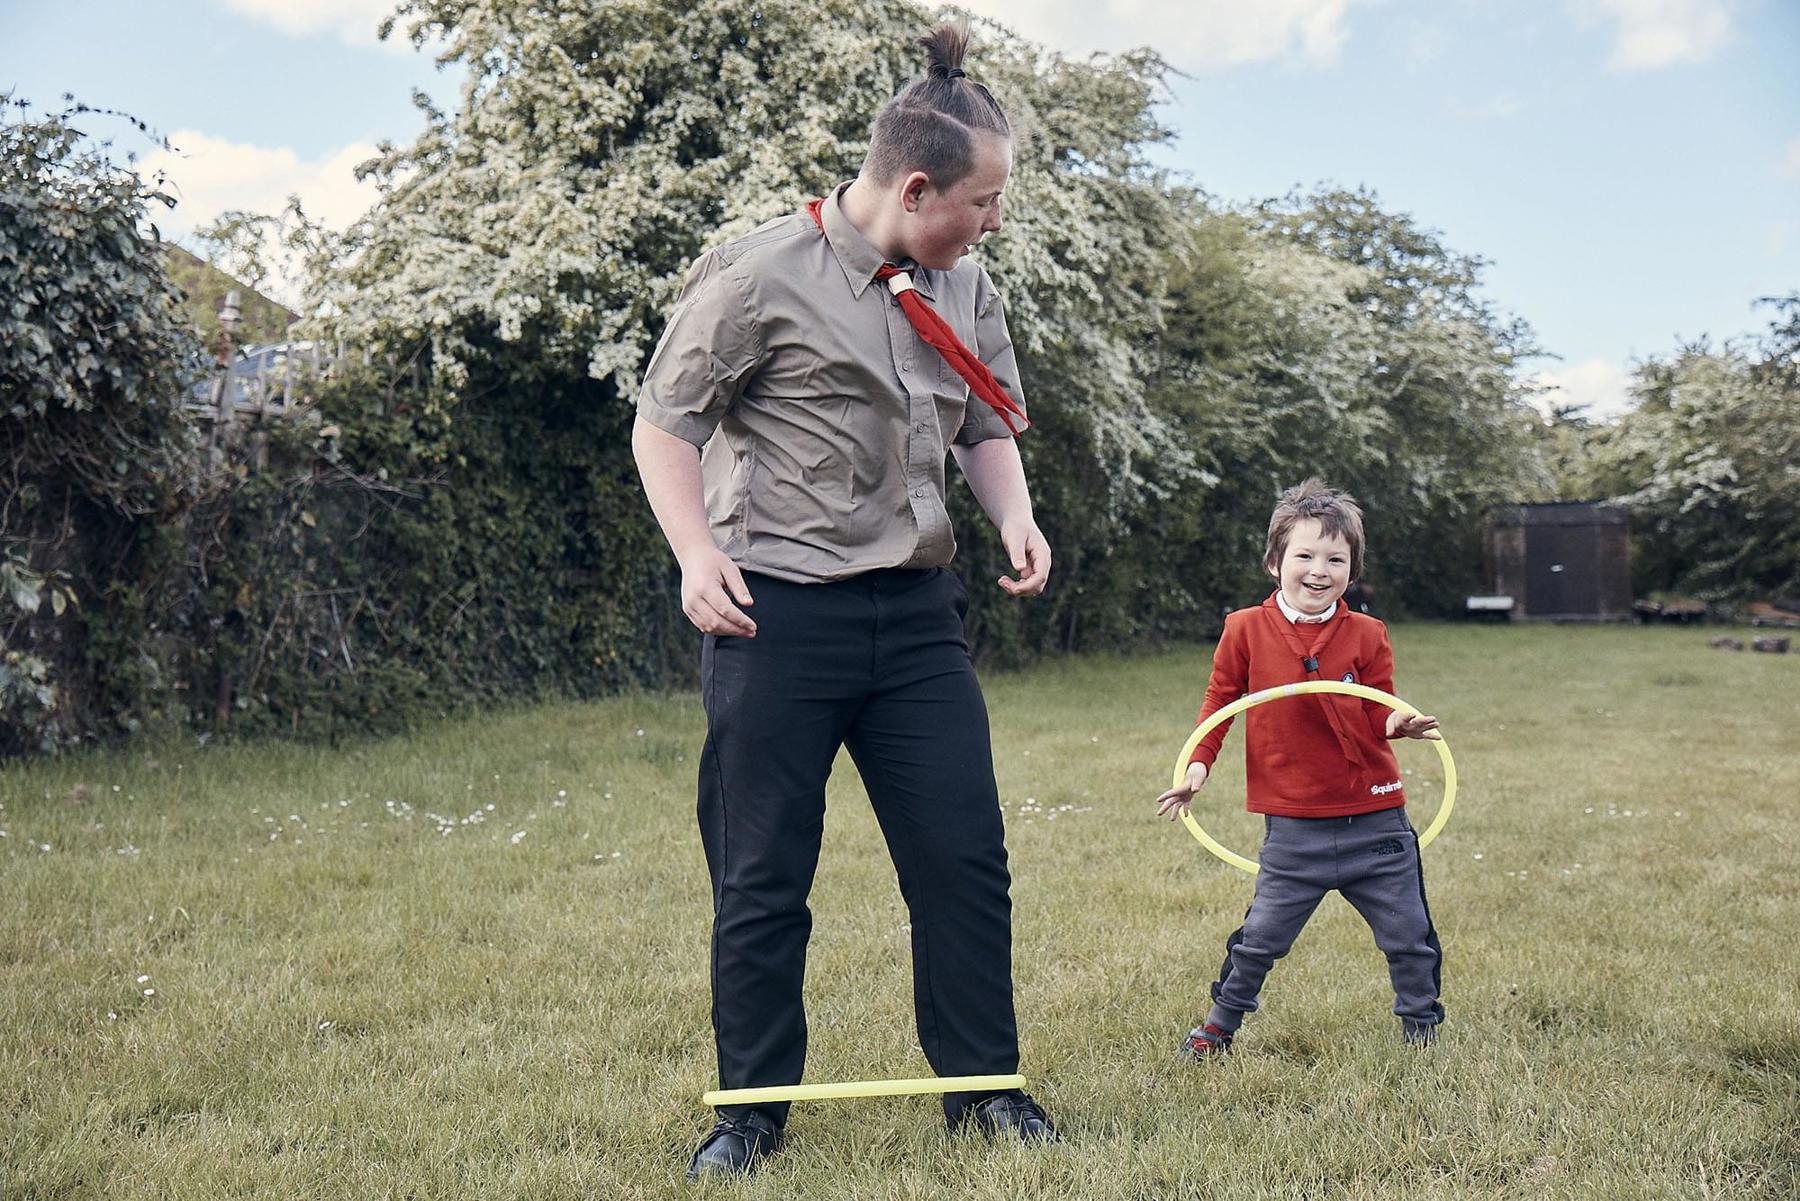 A young leader and Squirrel are playing with hoola hoops in a field.